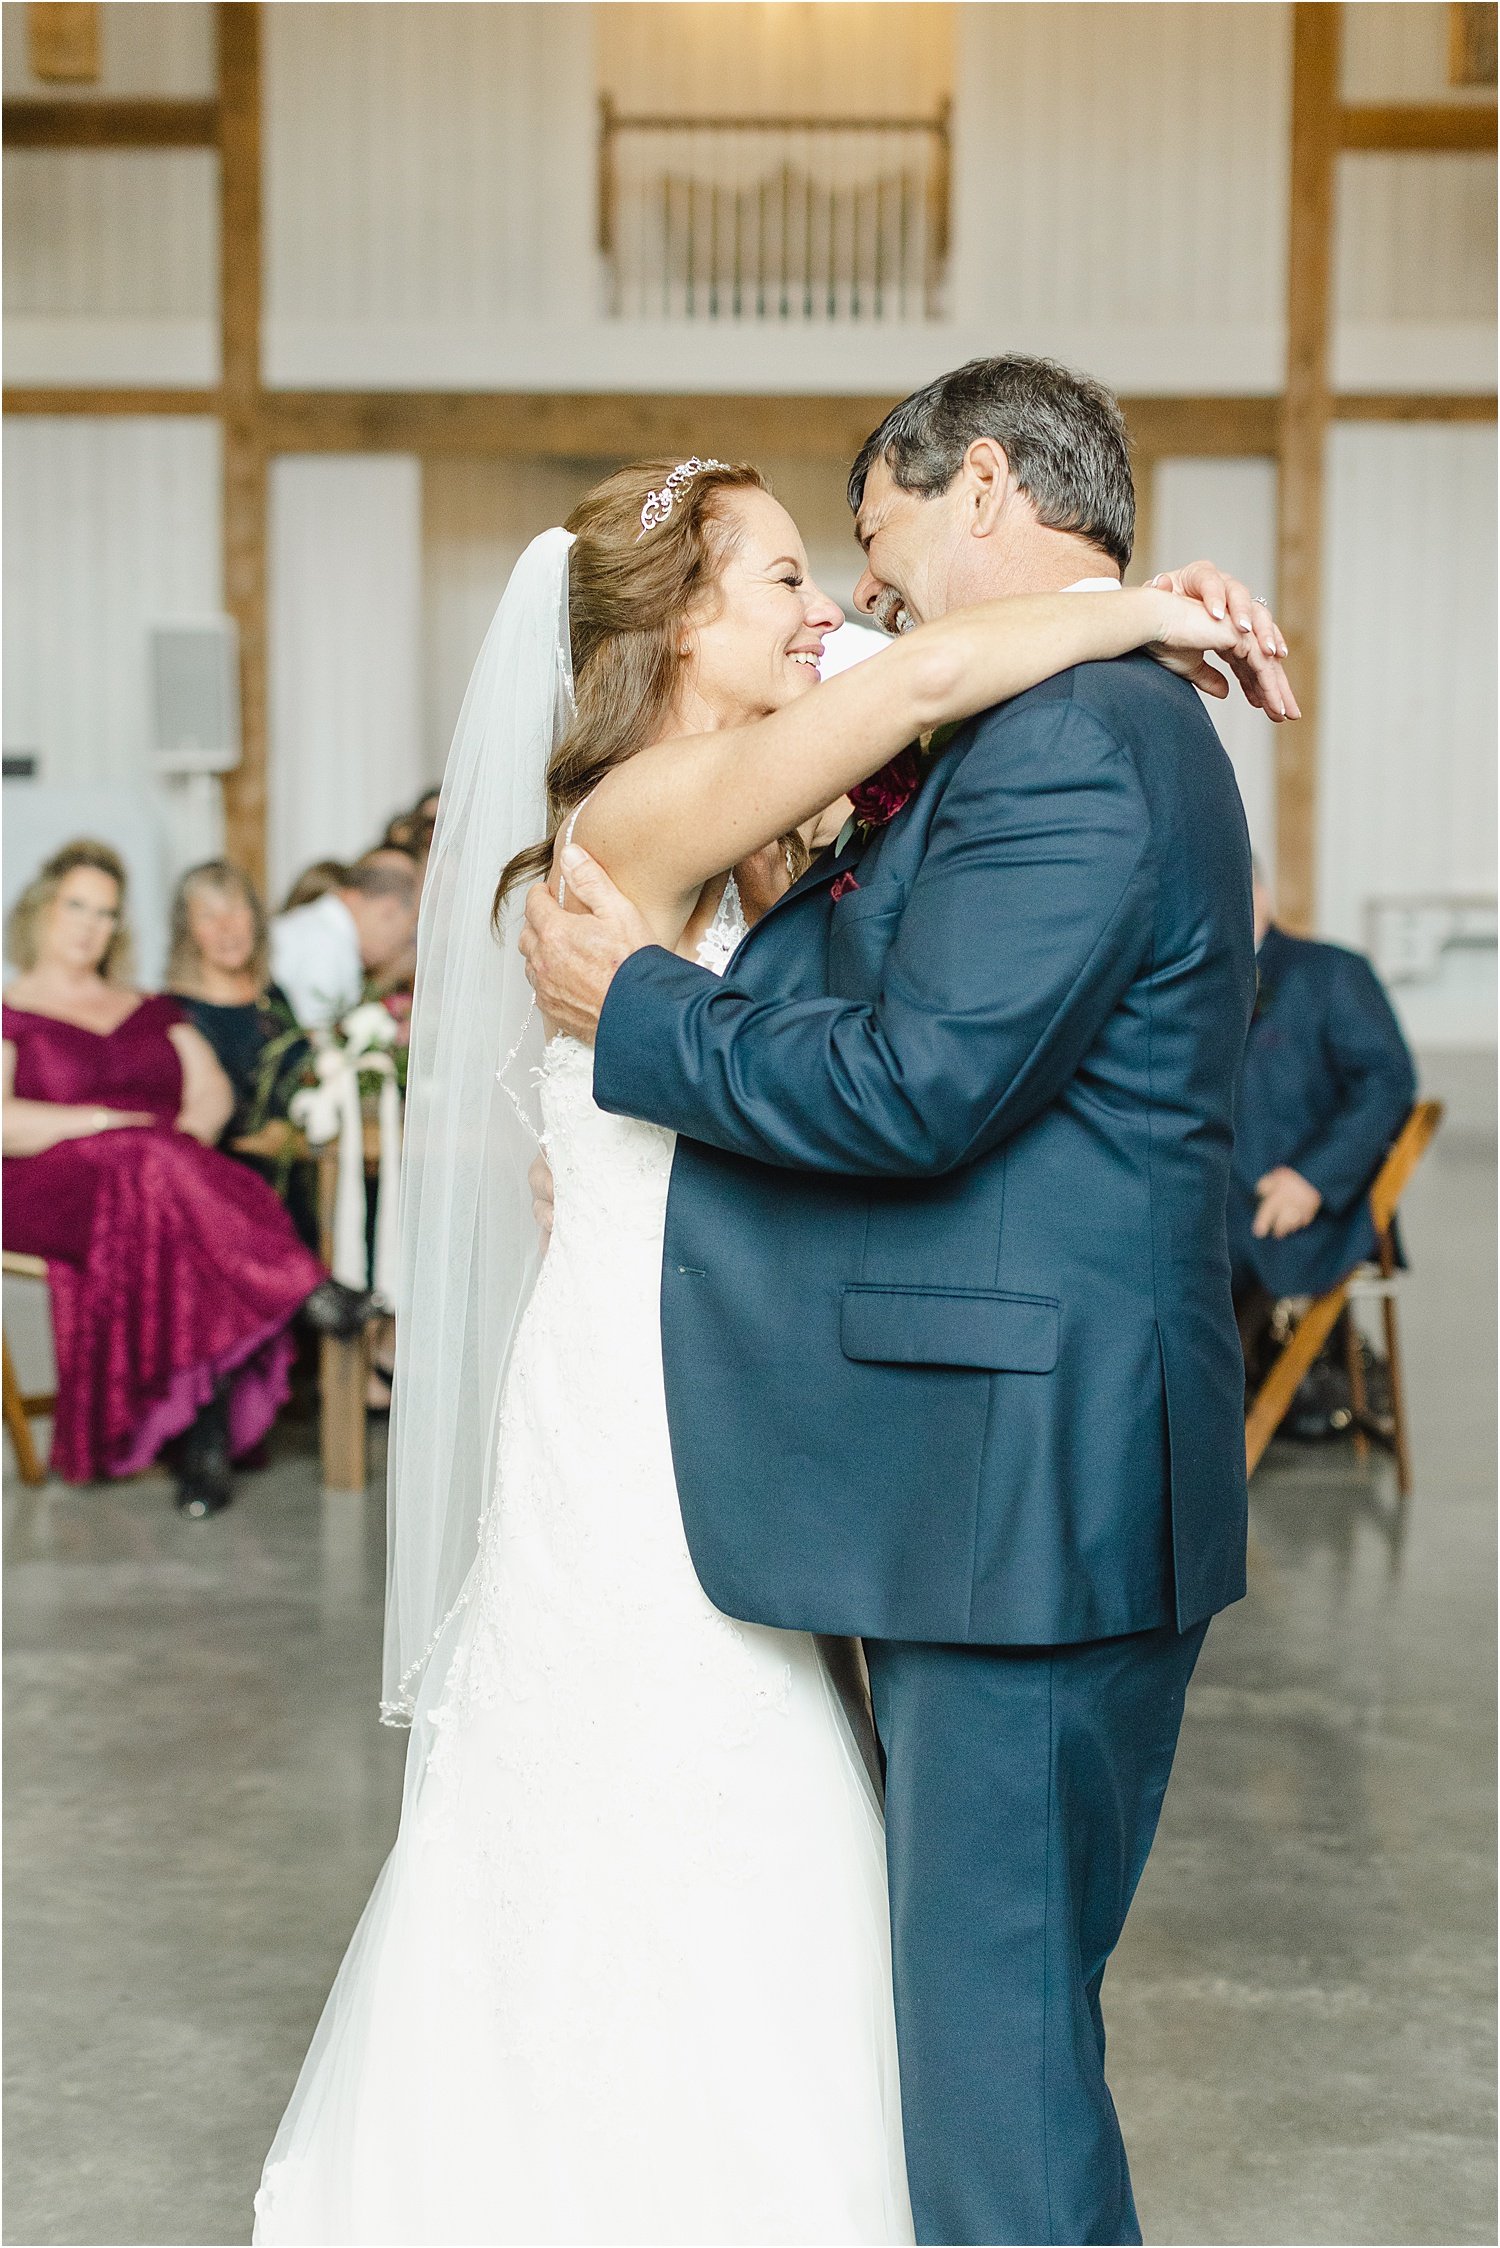 Happy Bride and Groom's First Dance